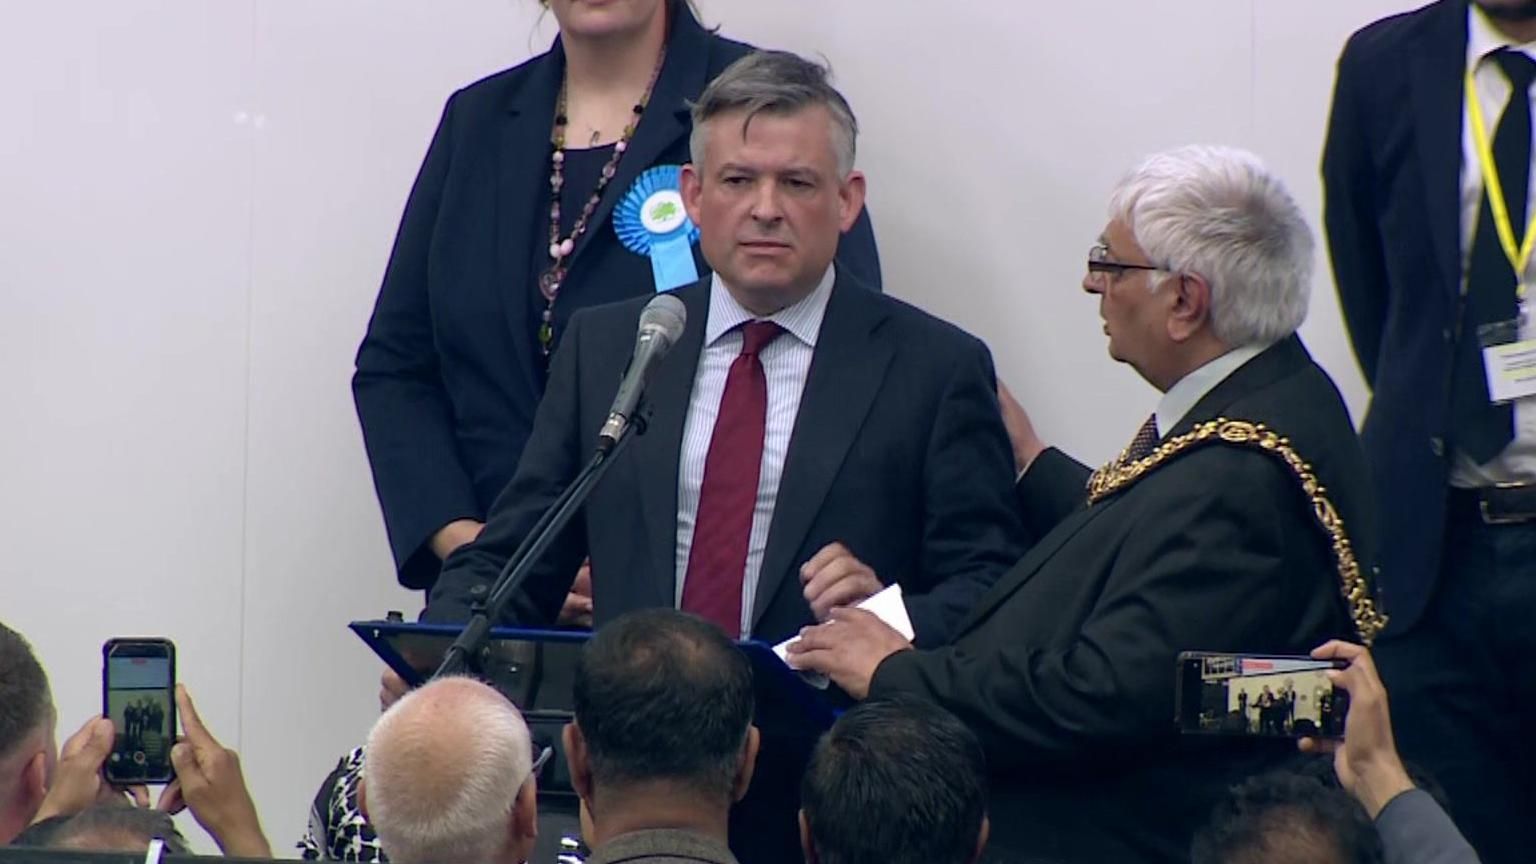 Jonathan Ashworth  speaking at a count where he learned he had lost his seat